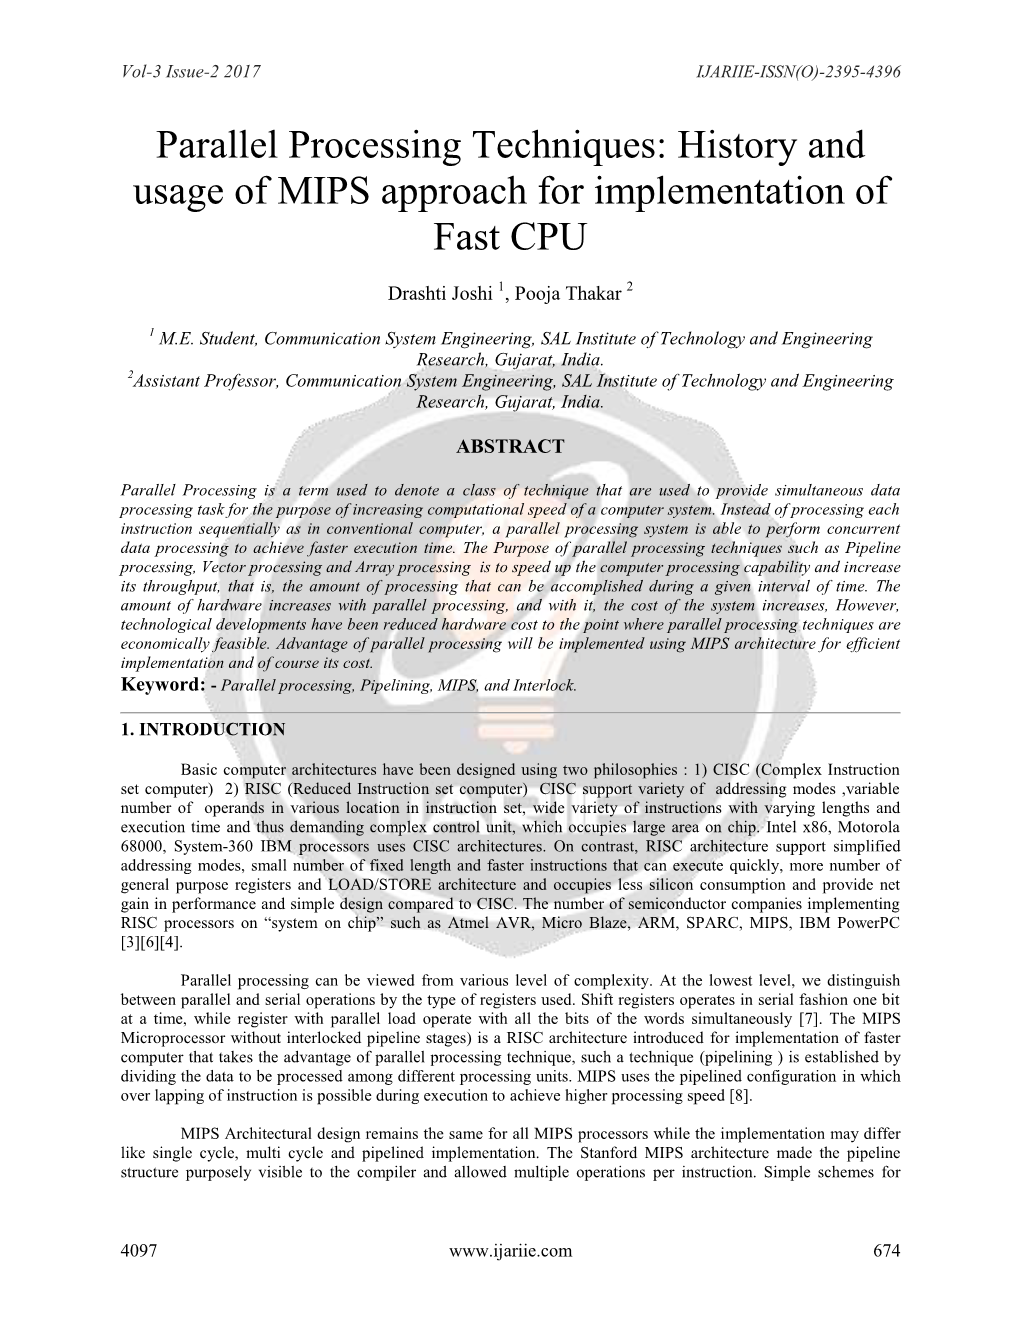 Parallel Processing Techniques: History and Usage of MIPS Approach for Implementation of Fast CPU